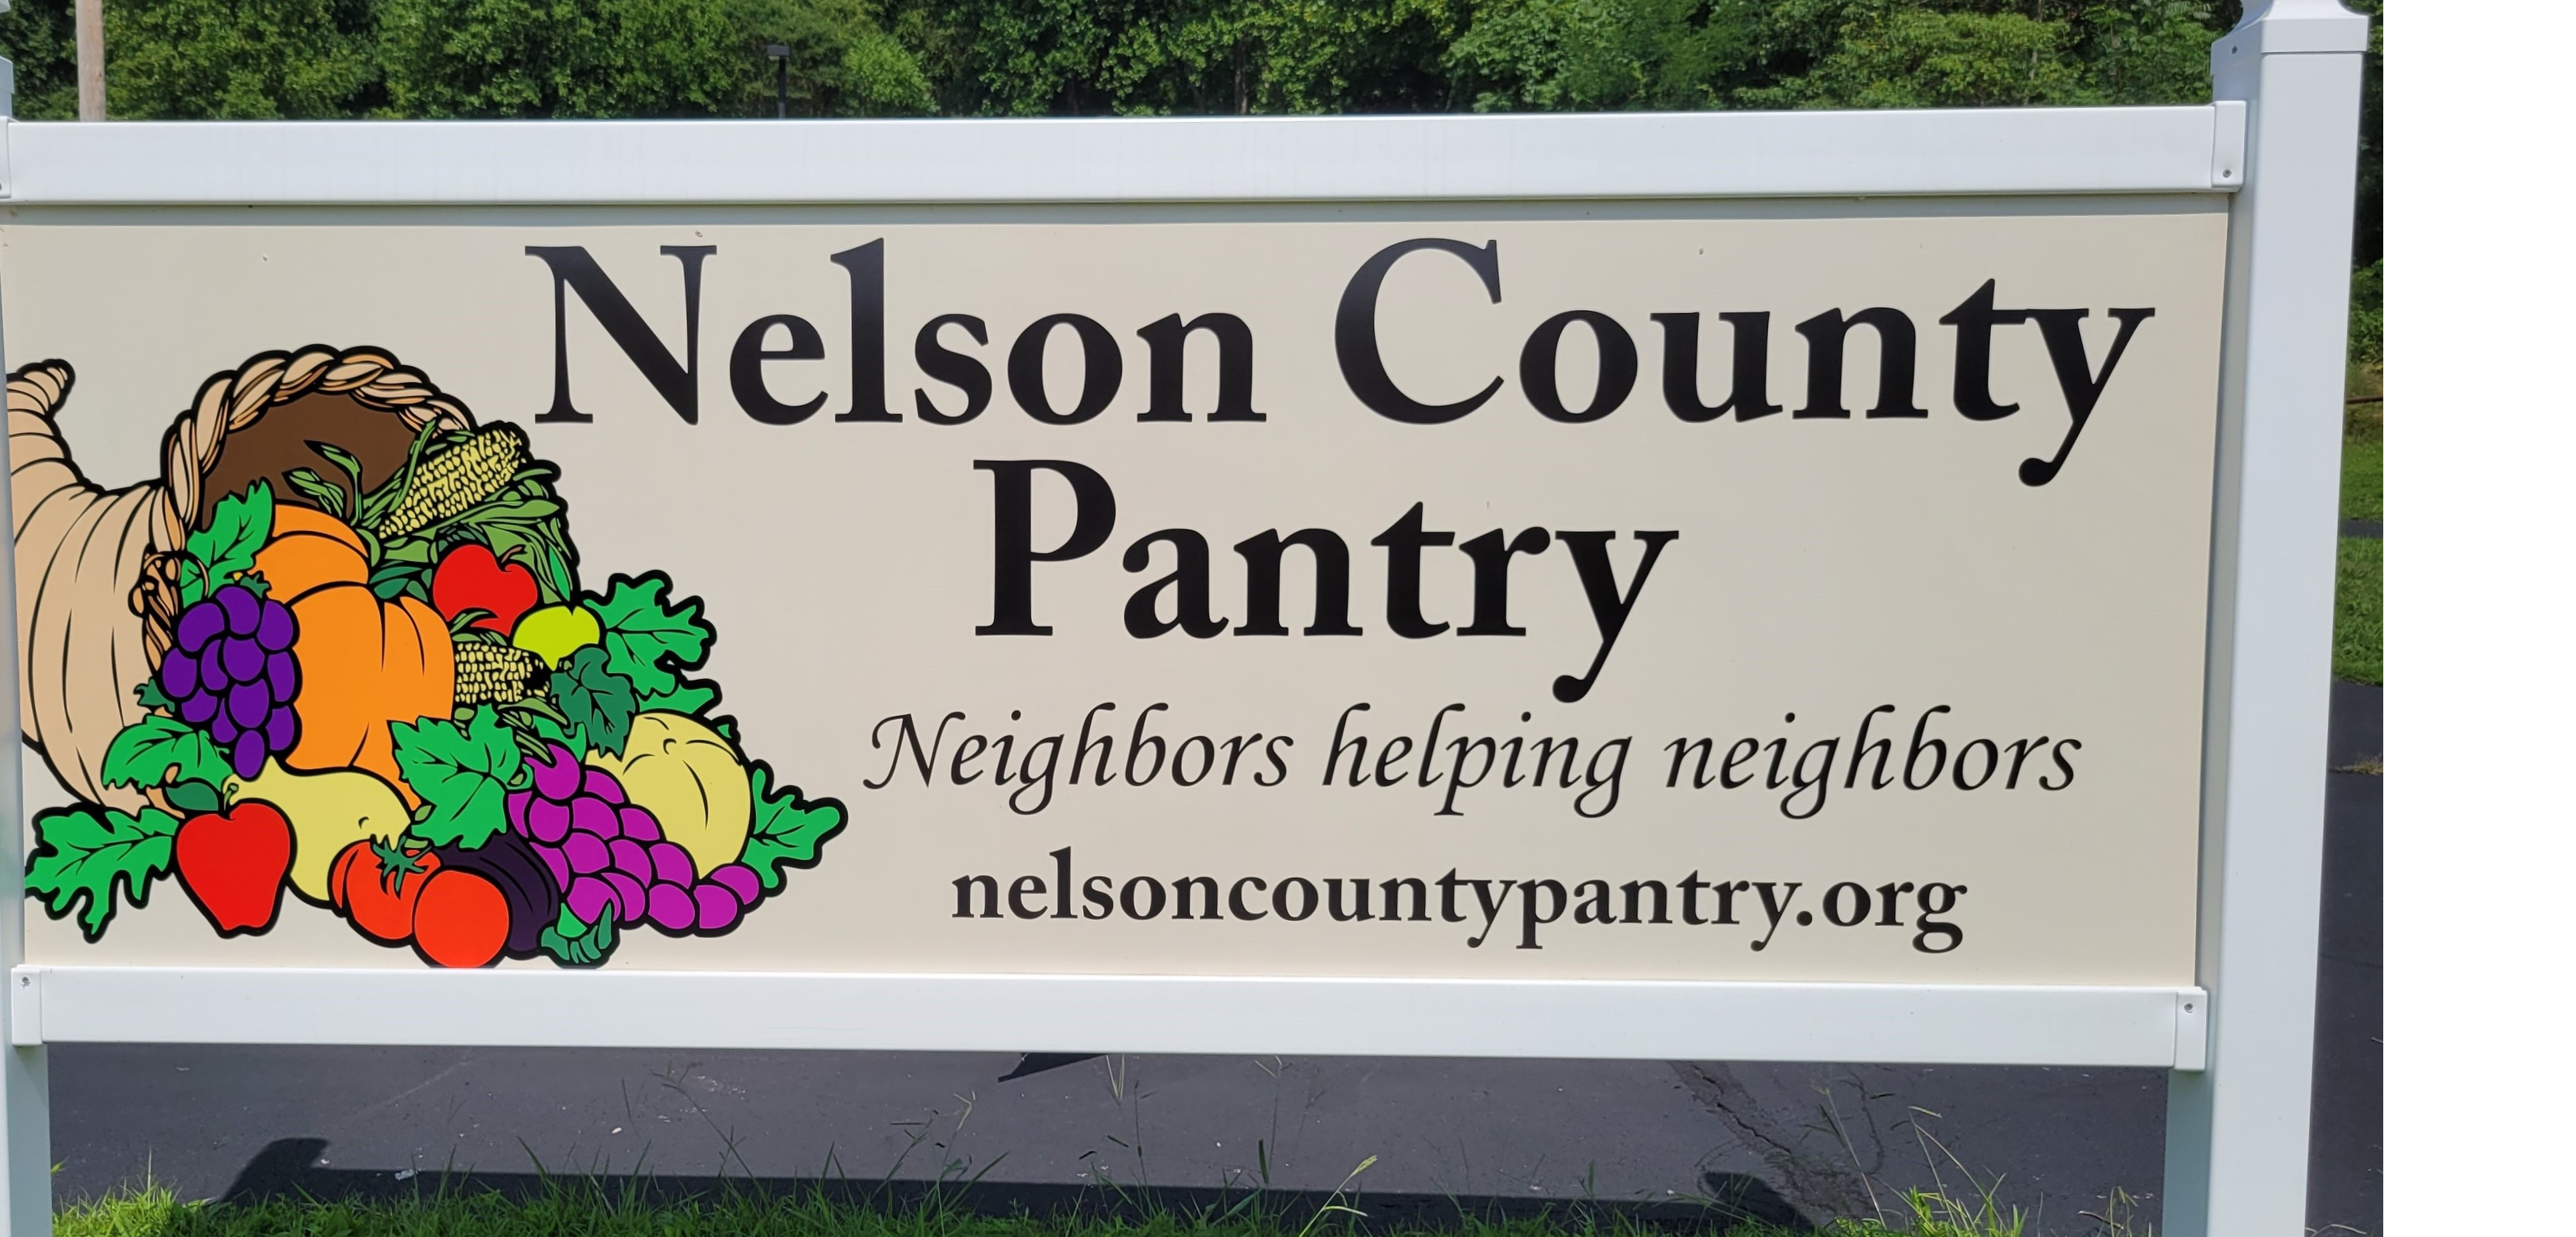 Nelson County Pantry